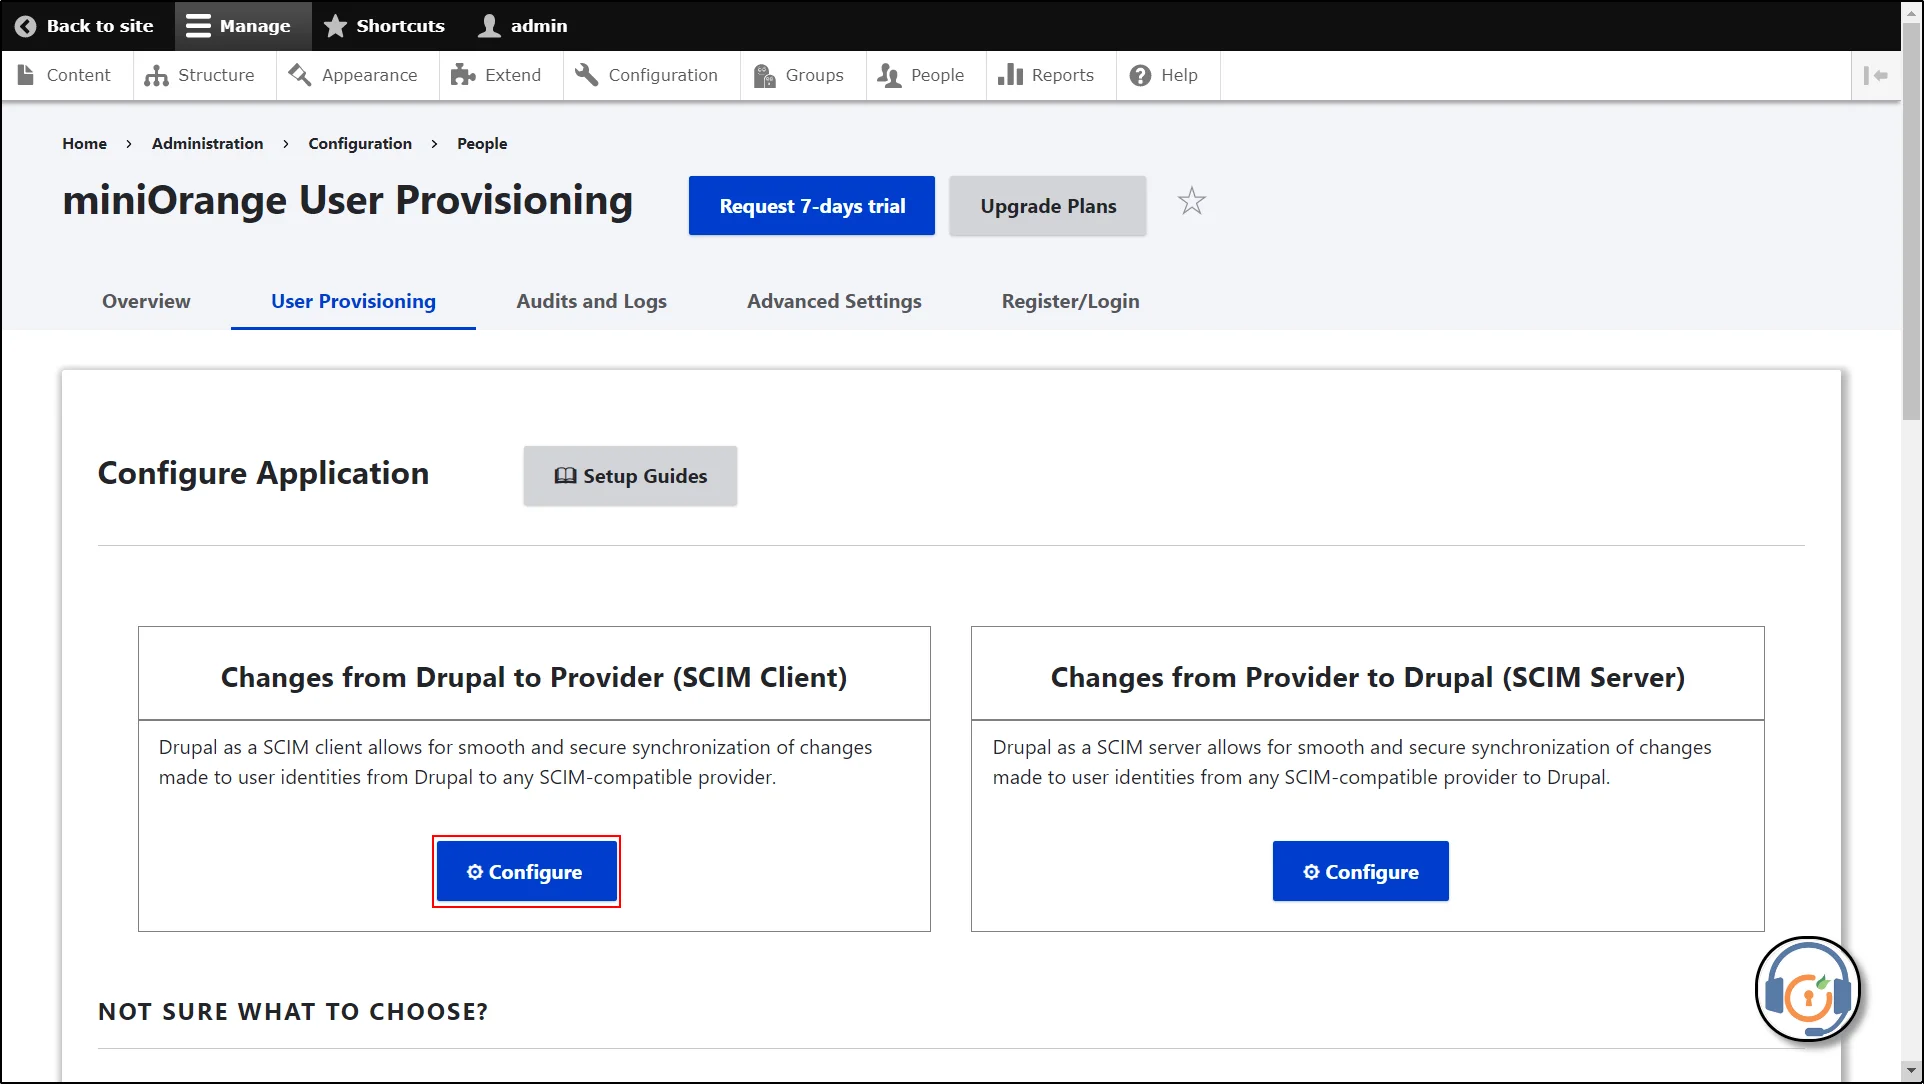 Drupal-SCIM-Client-Joomla-Select-Changes-From-Drupla-to-Providerr